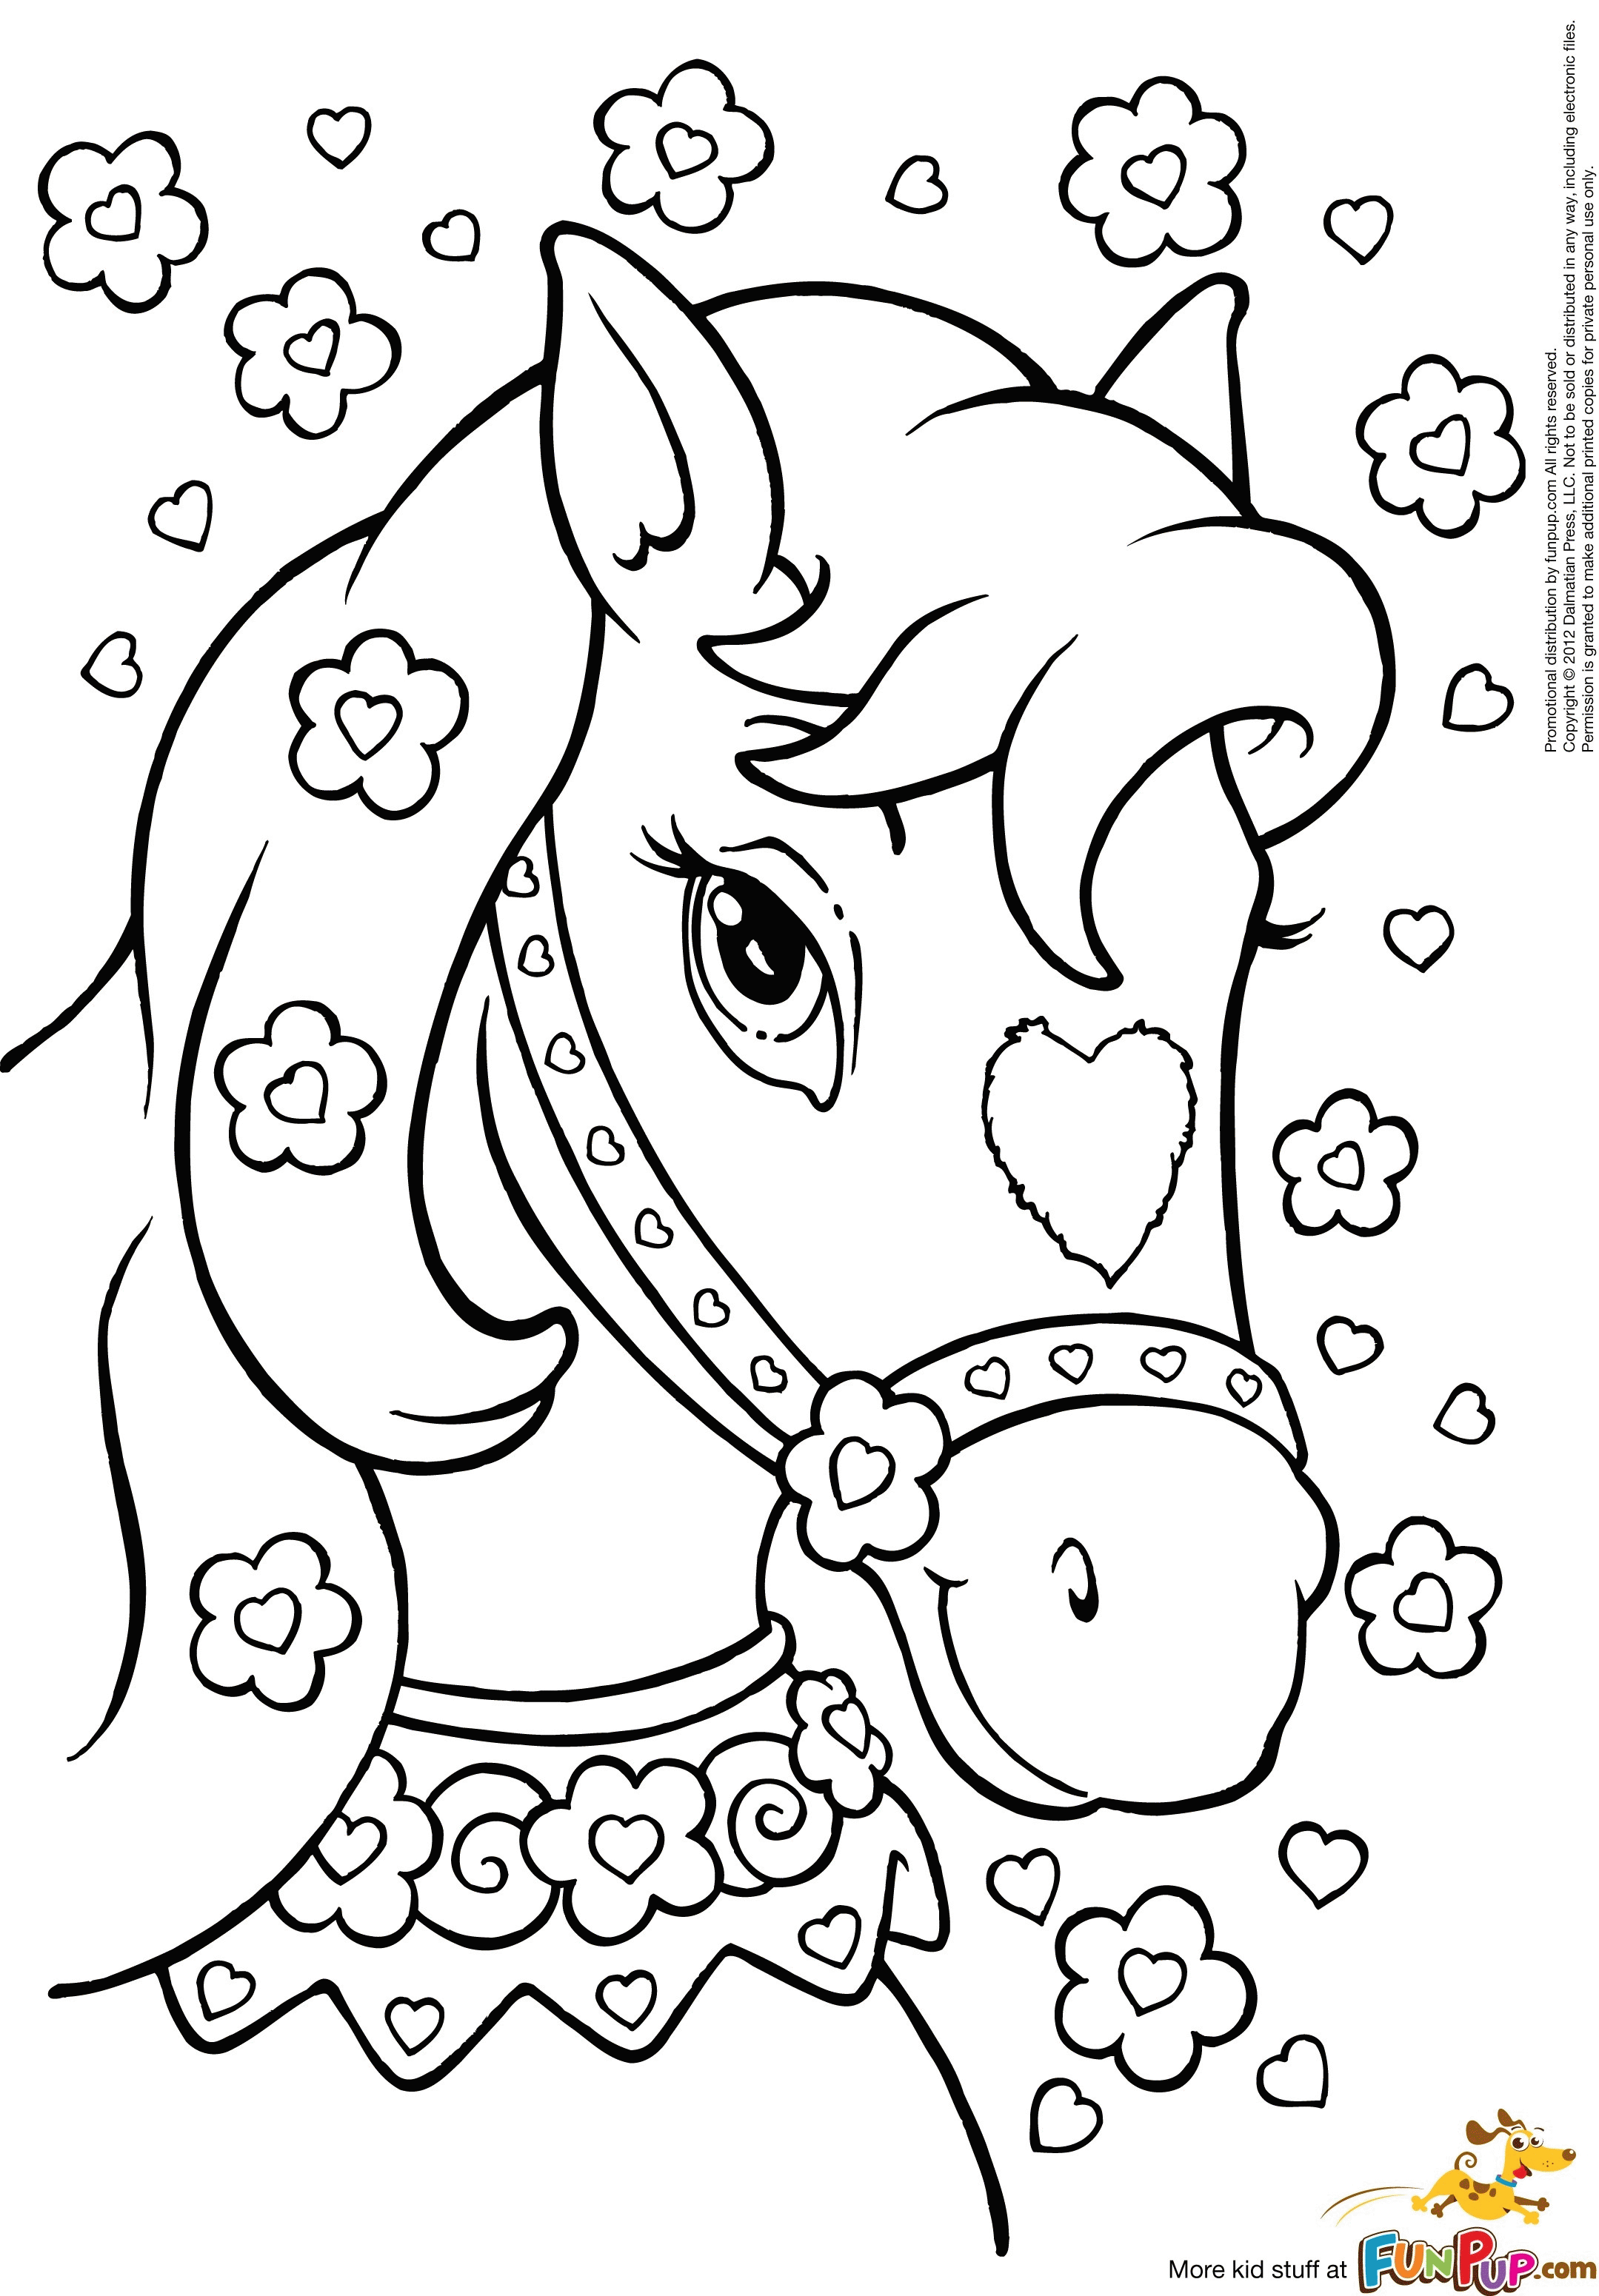 20 Free Pictures for: Princes Coloring Pages. Temoon.us